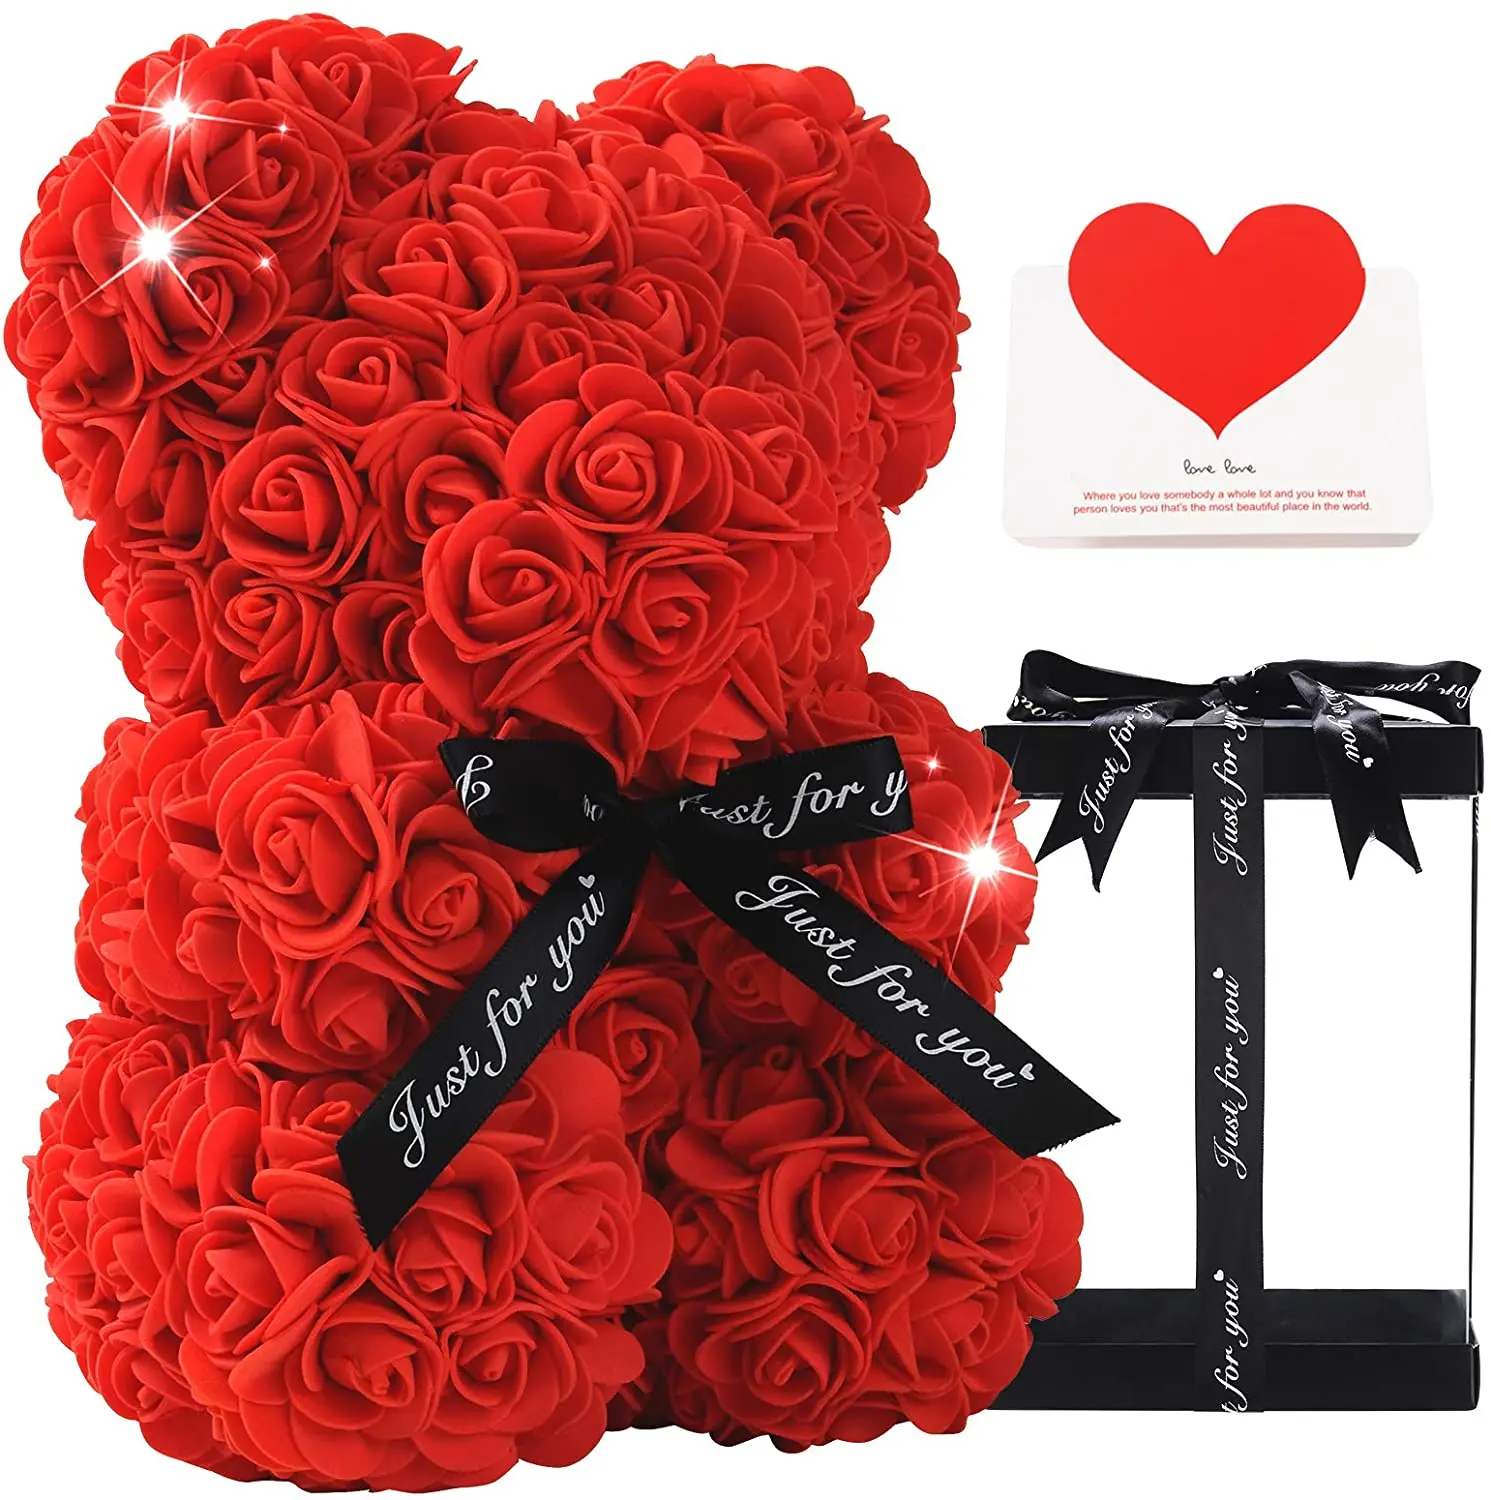 25CM Romantic Teddy Bear Rose Bear Valentine's Day Weeding Gift With Gifts Box 